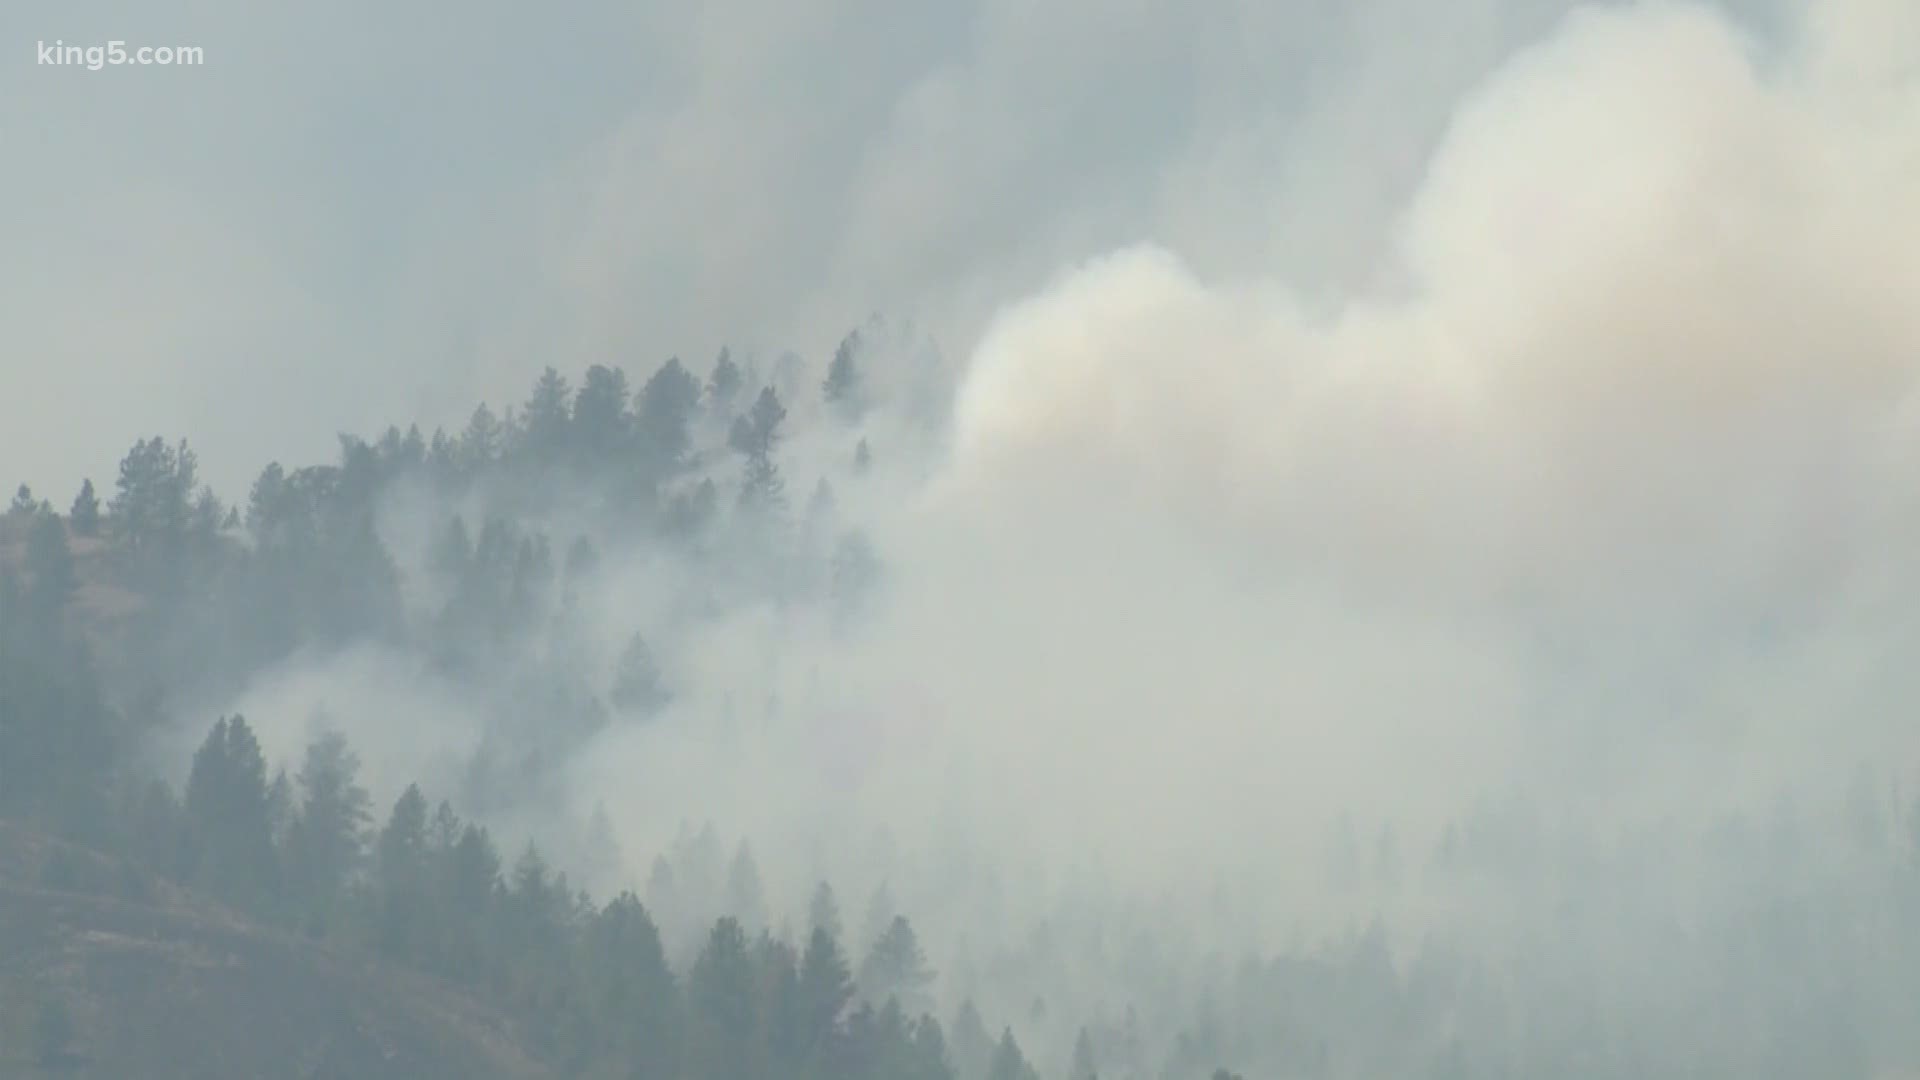 Burn ban issued for all 12 million acres of Washington state's DNR land